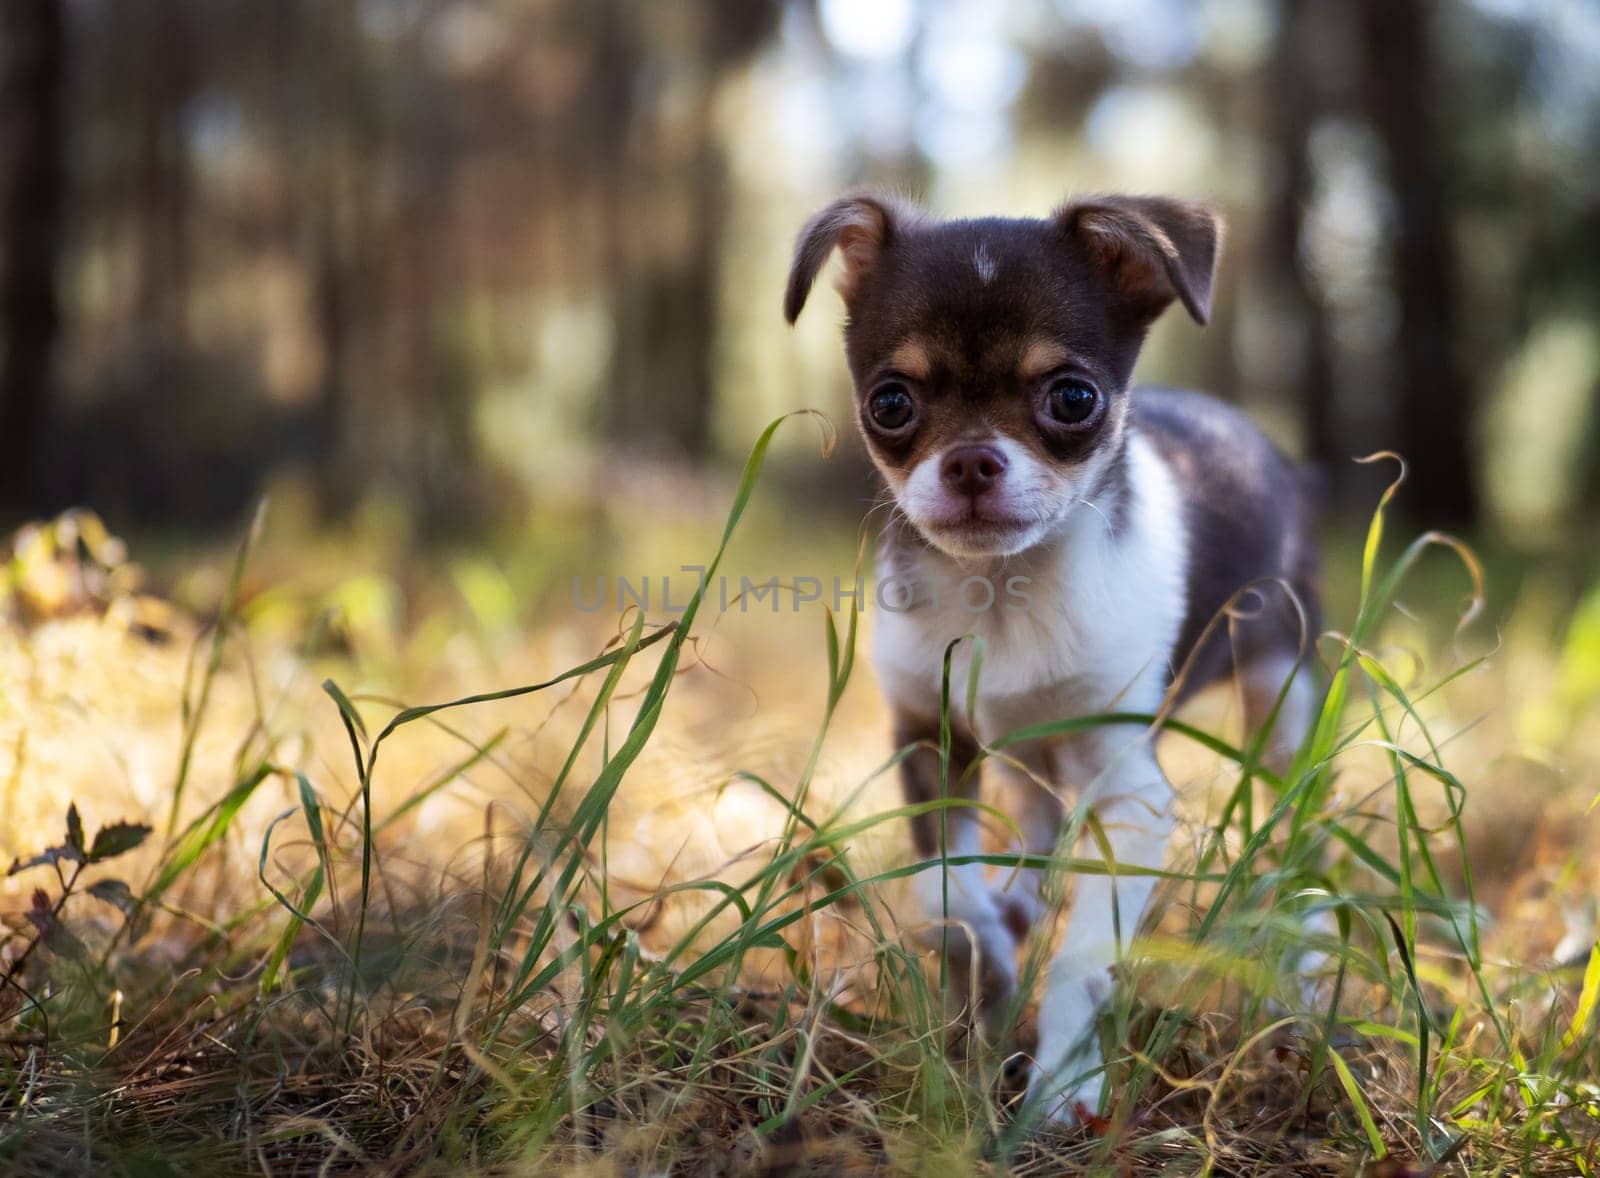 A tiny Chihuahua puppy explores a forest floor, with the warm hues of fall leaves surrounding it.